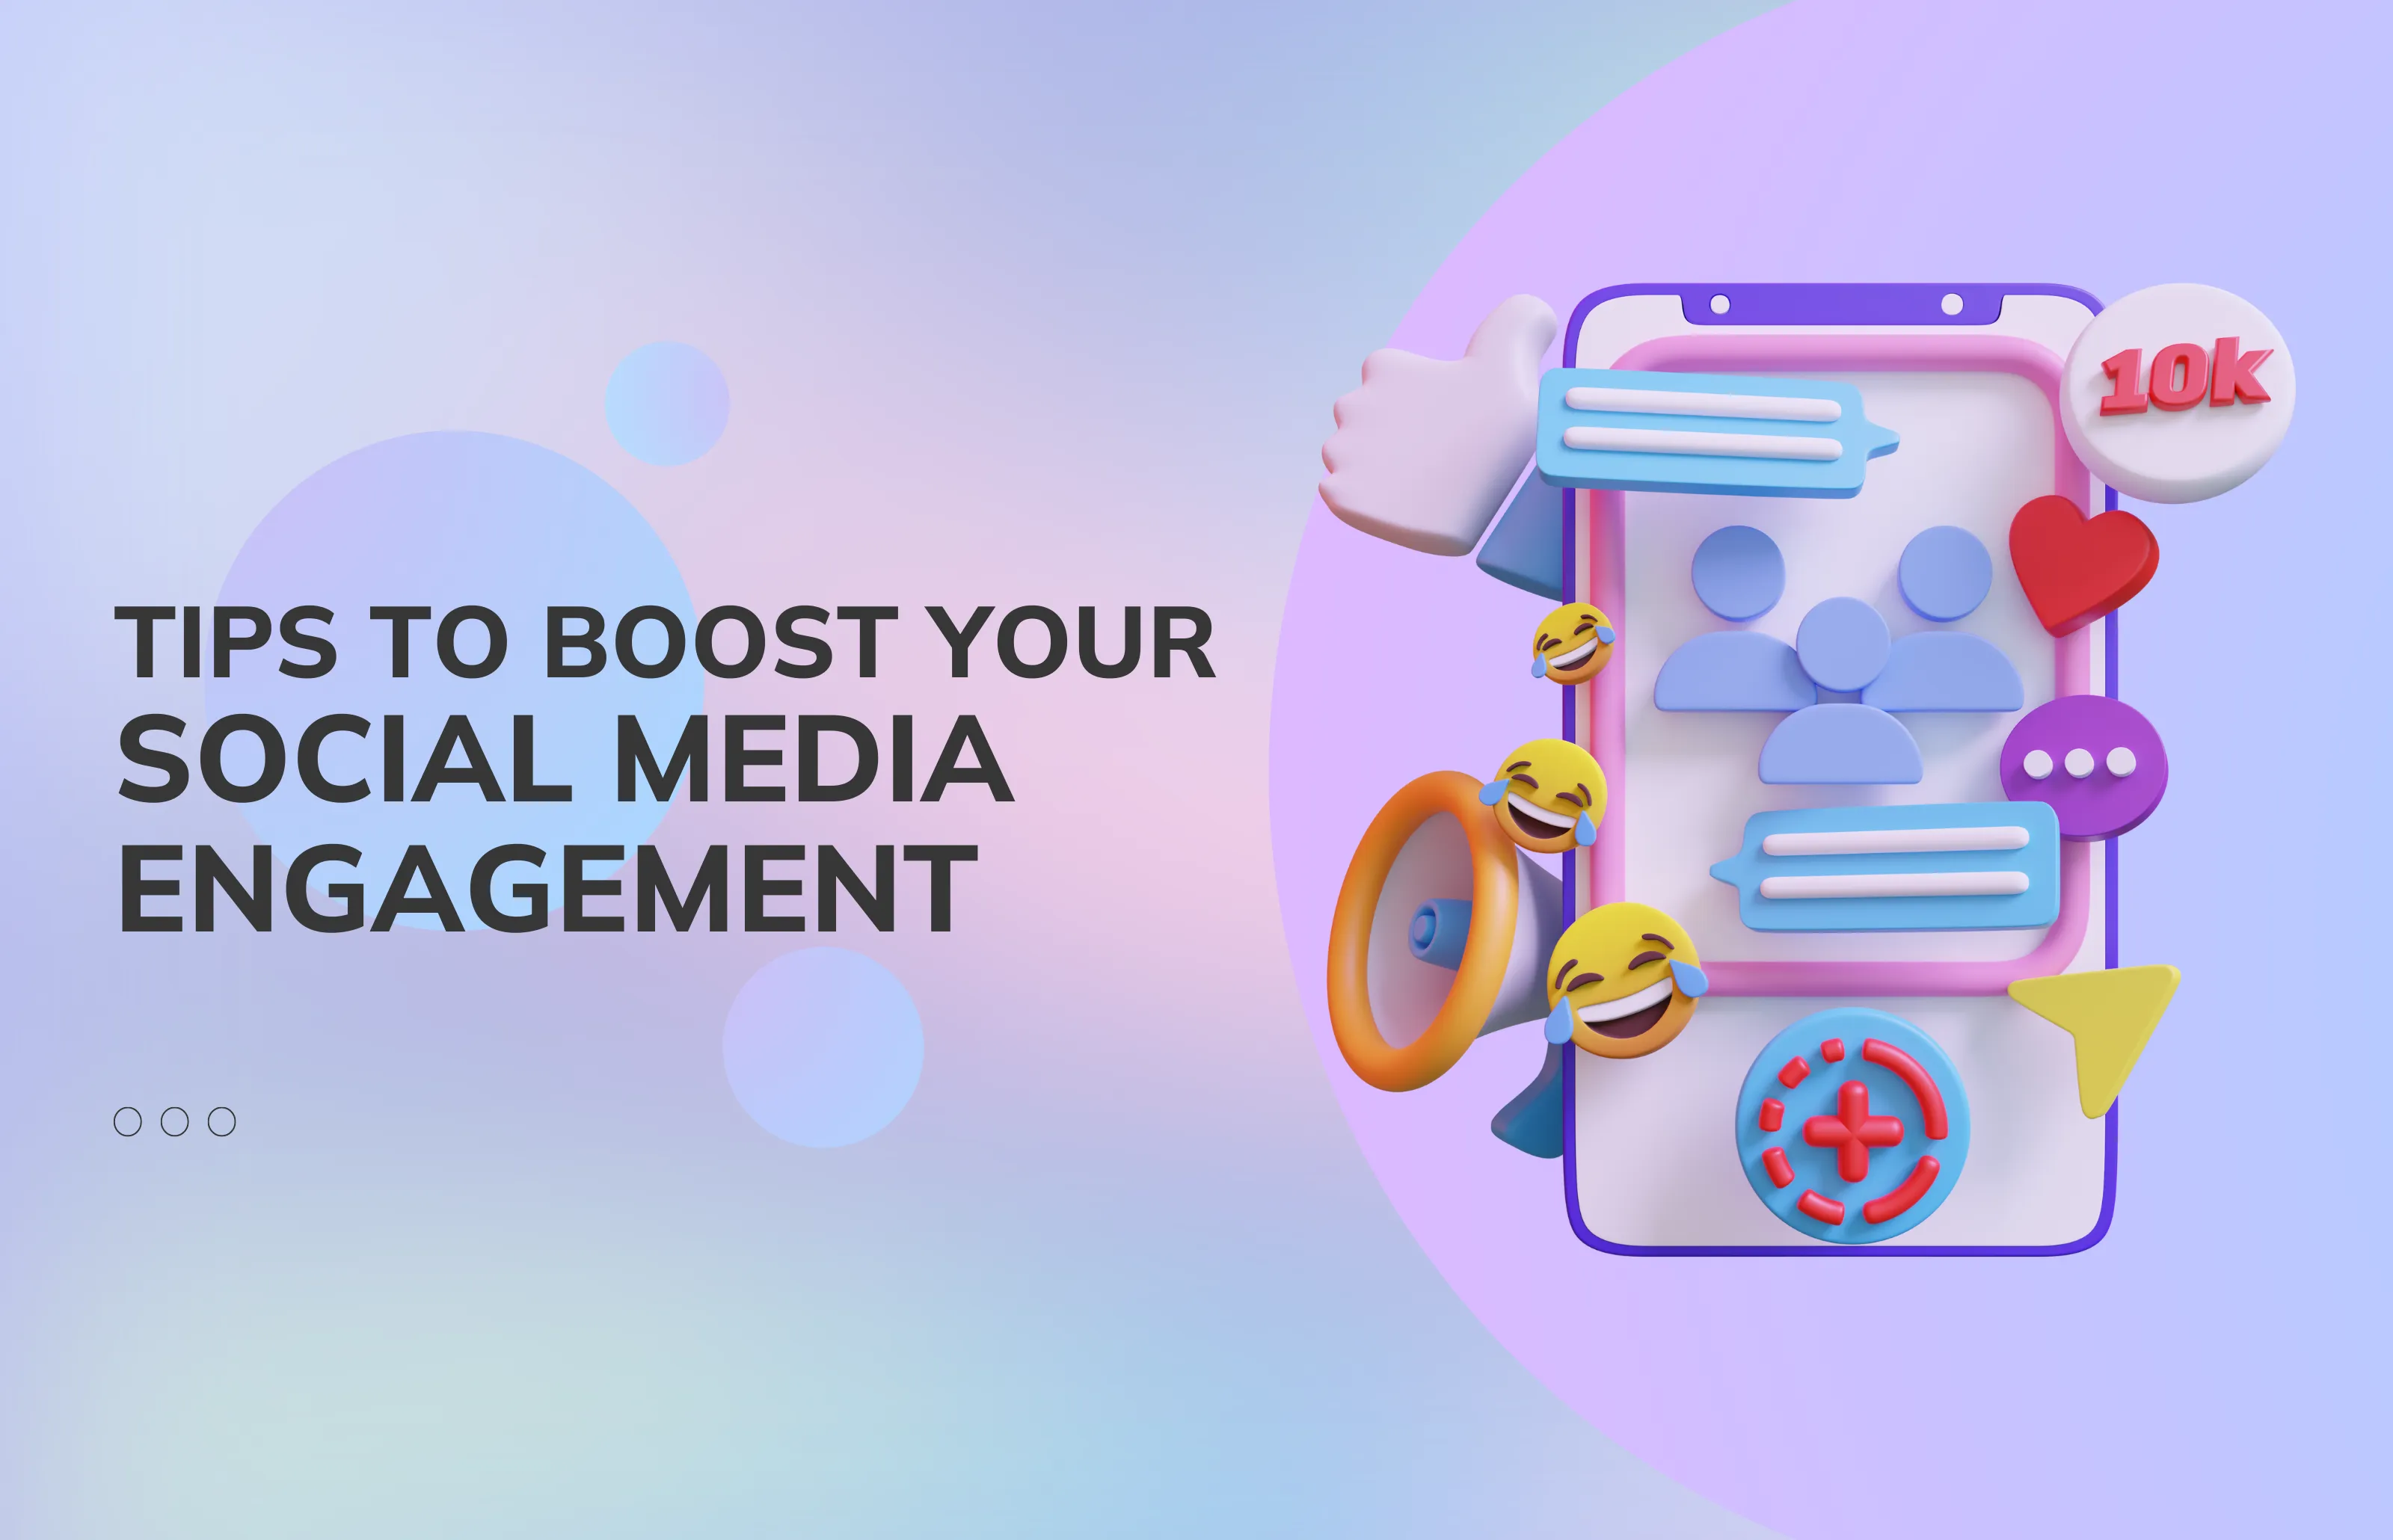 Tips to Boost Your Social Media Engagement